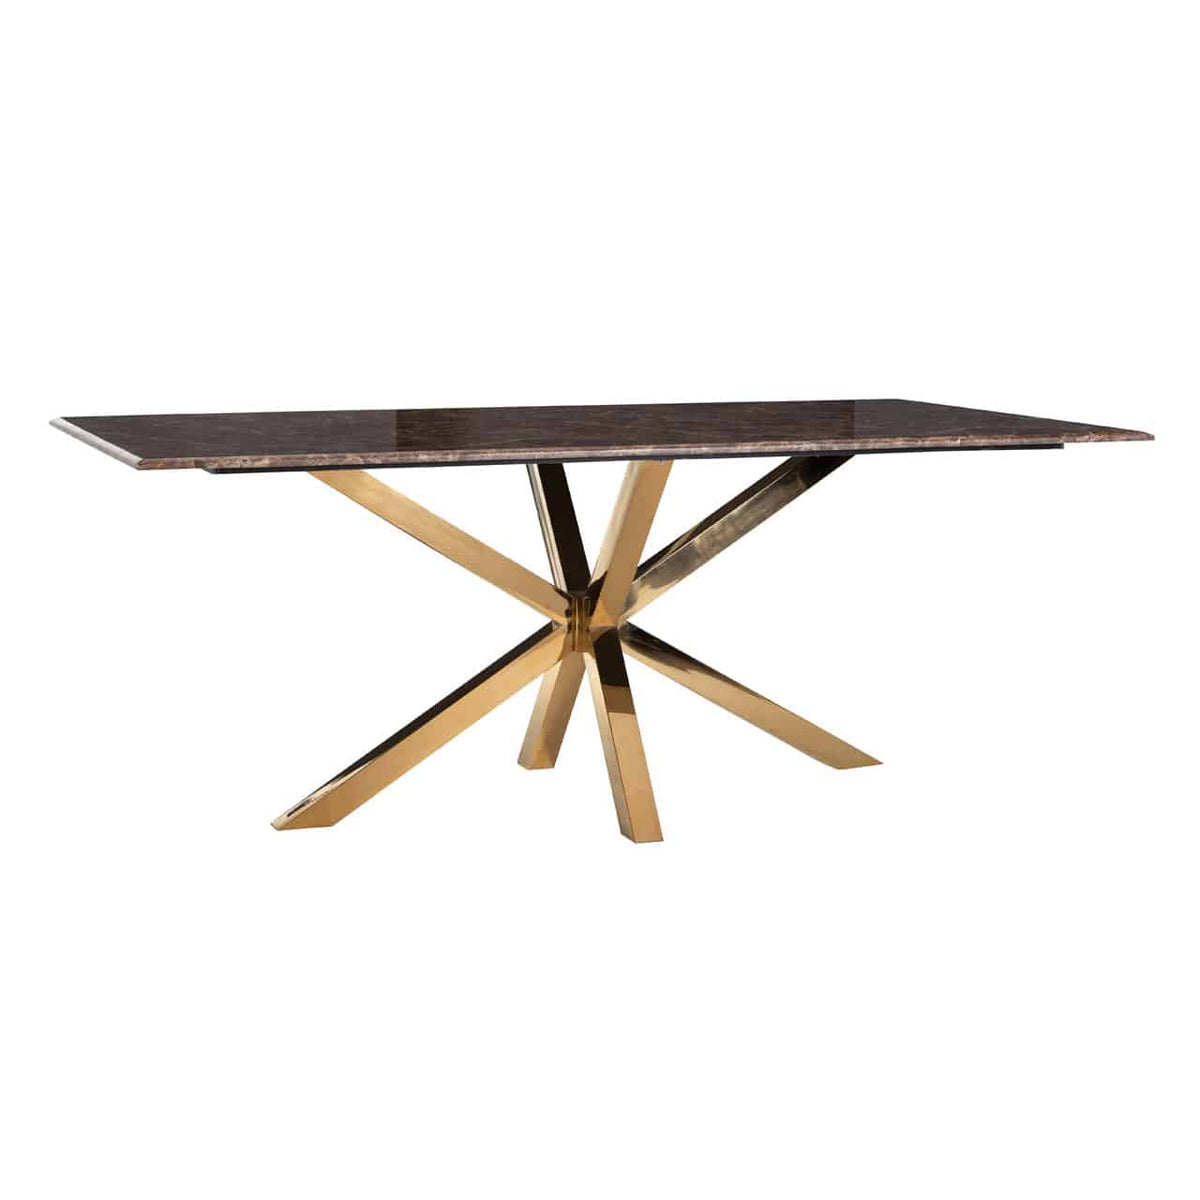 Dining Conrad table with faux emperador marble (Gold)